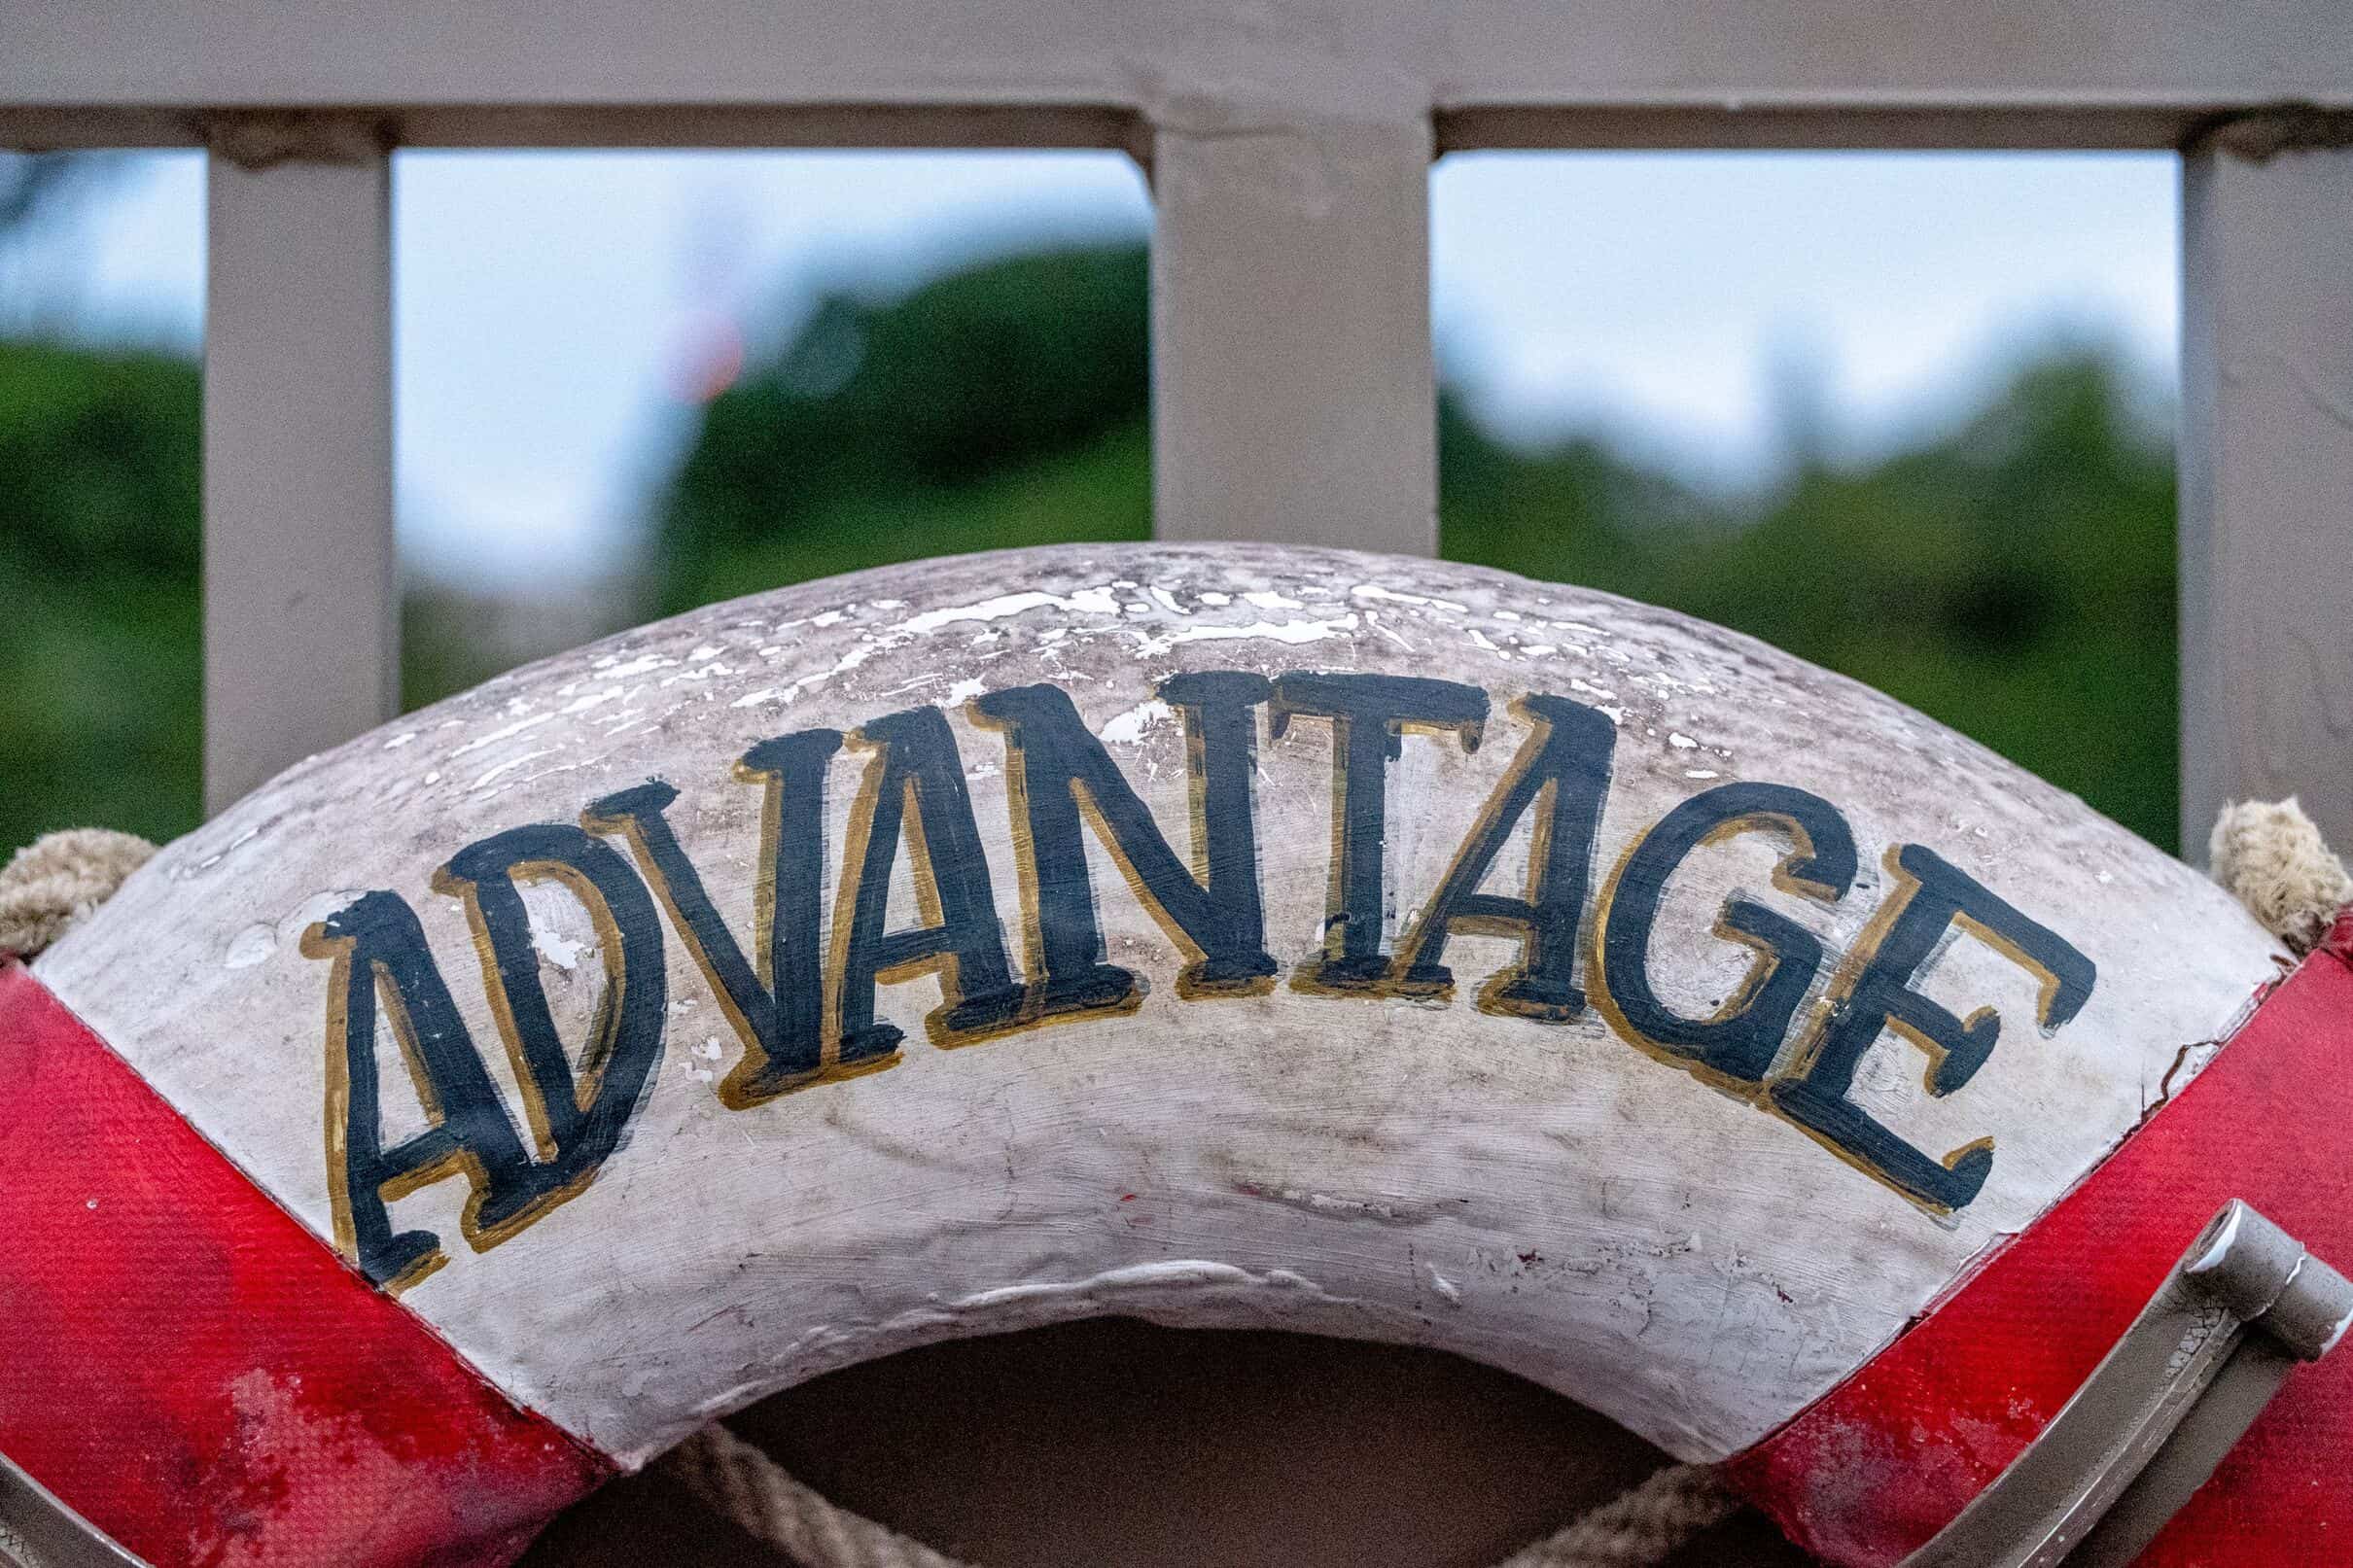 A visually striking representation of the word 'advantage' in bold letters.